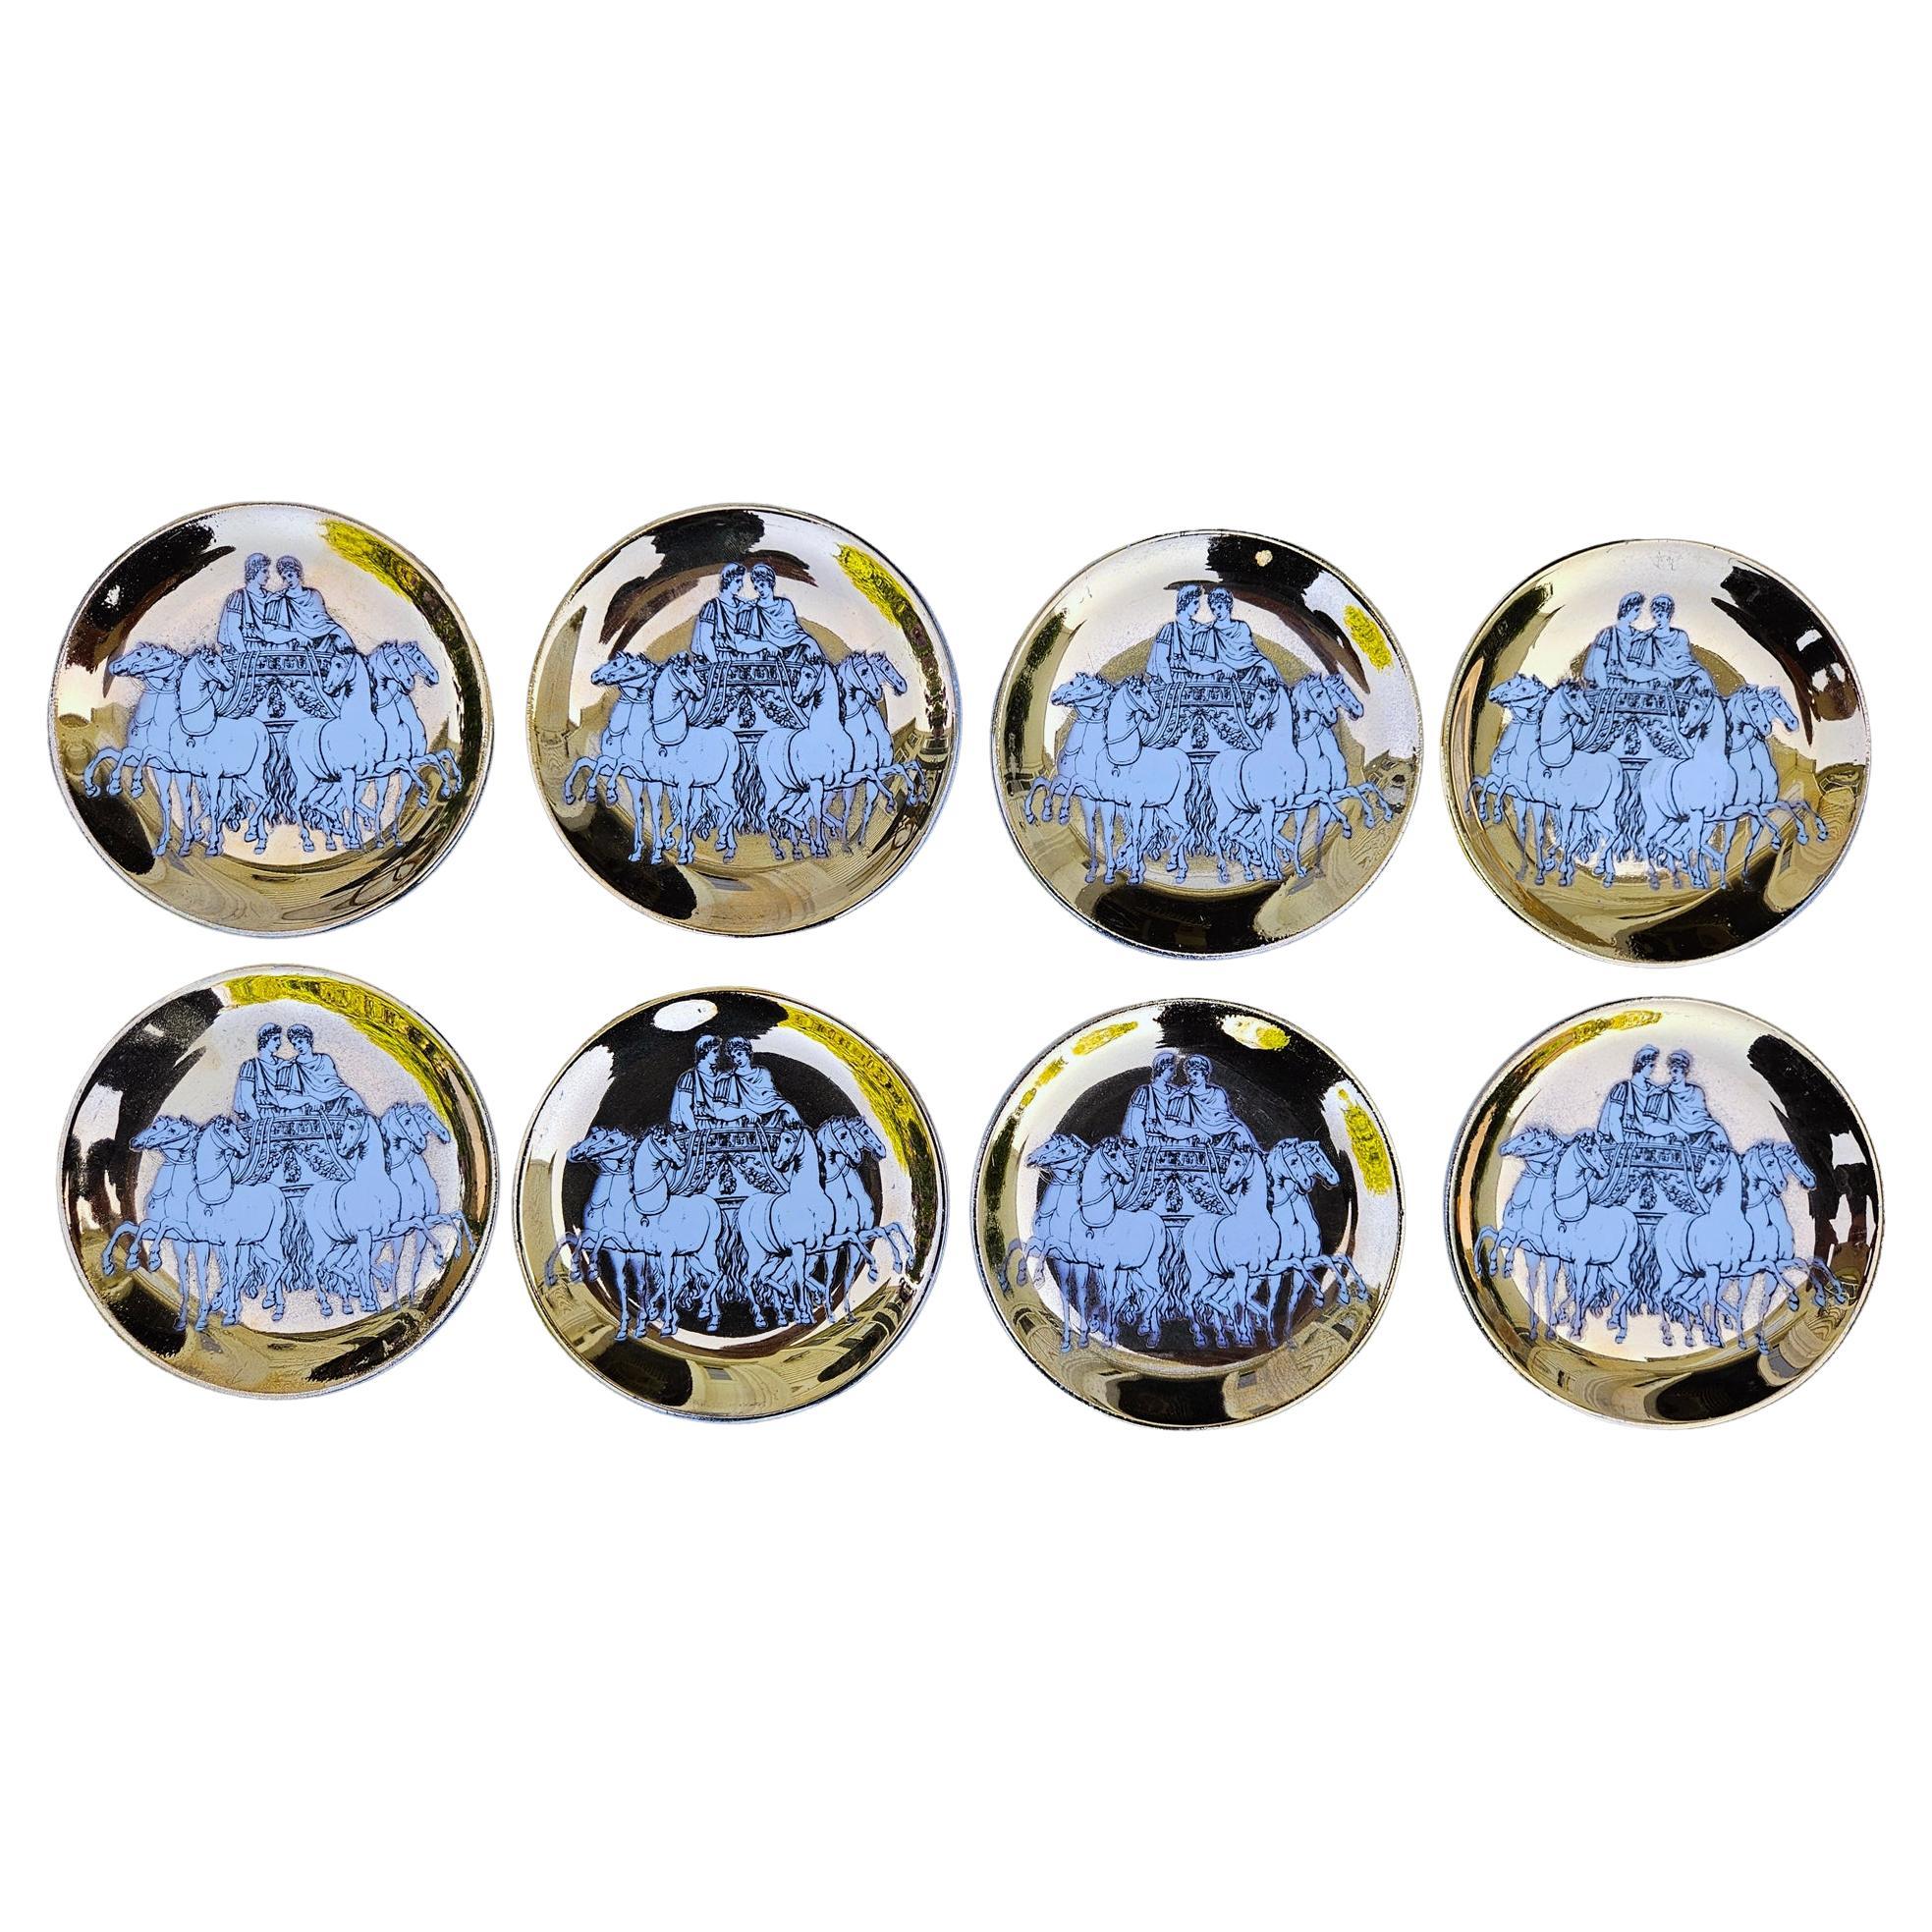 Piero Fornasetti Neo-classical Ceramic Coaster Set of Eight with Roman Chariots For Sale